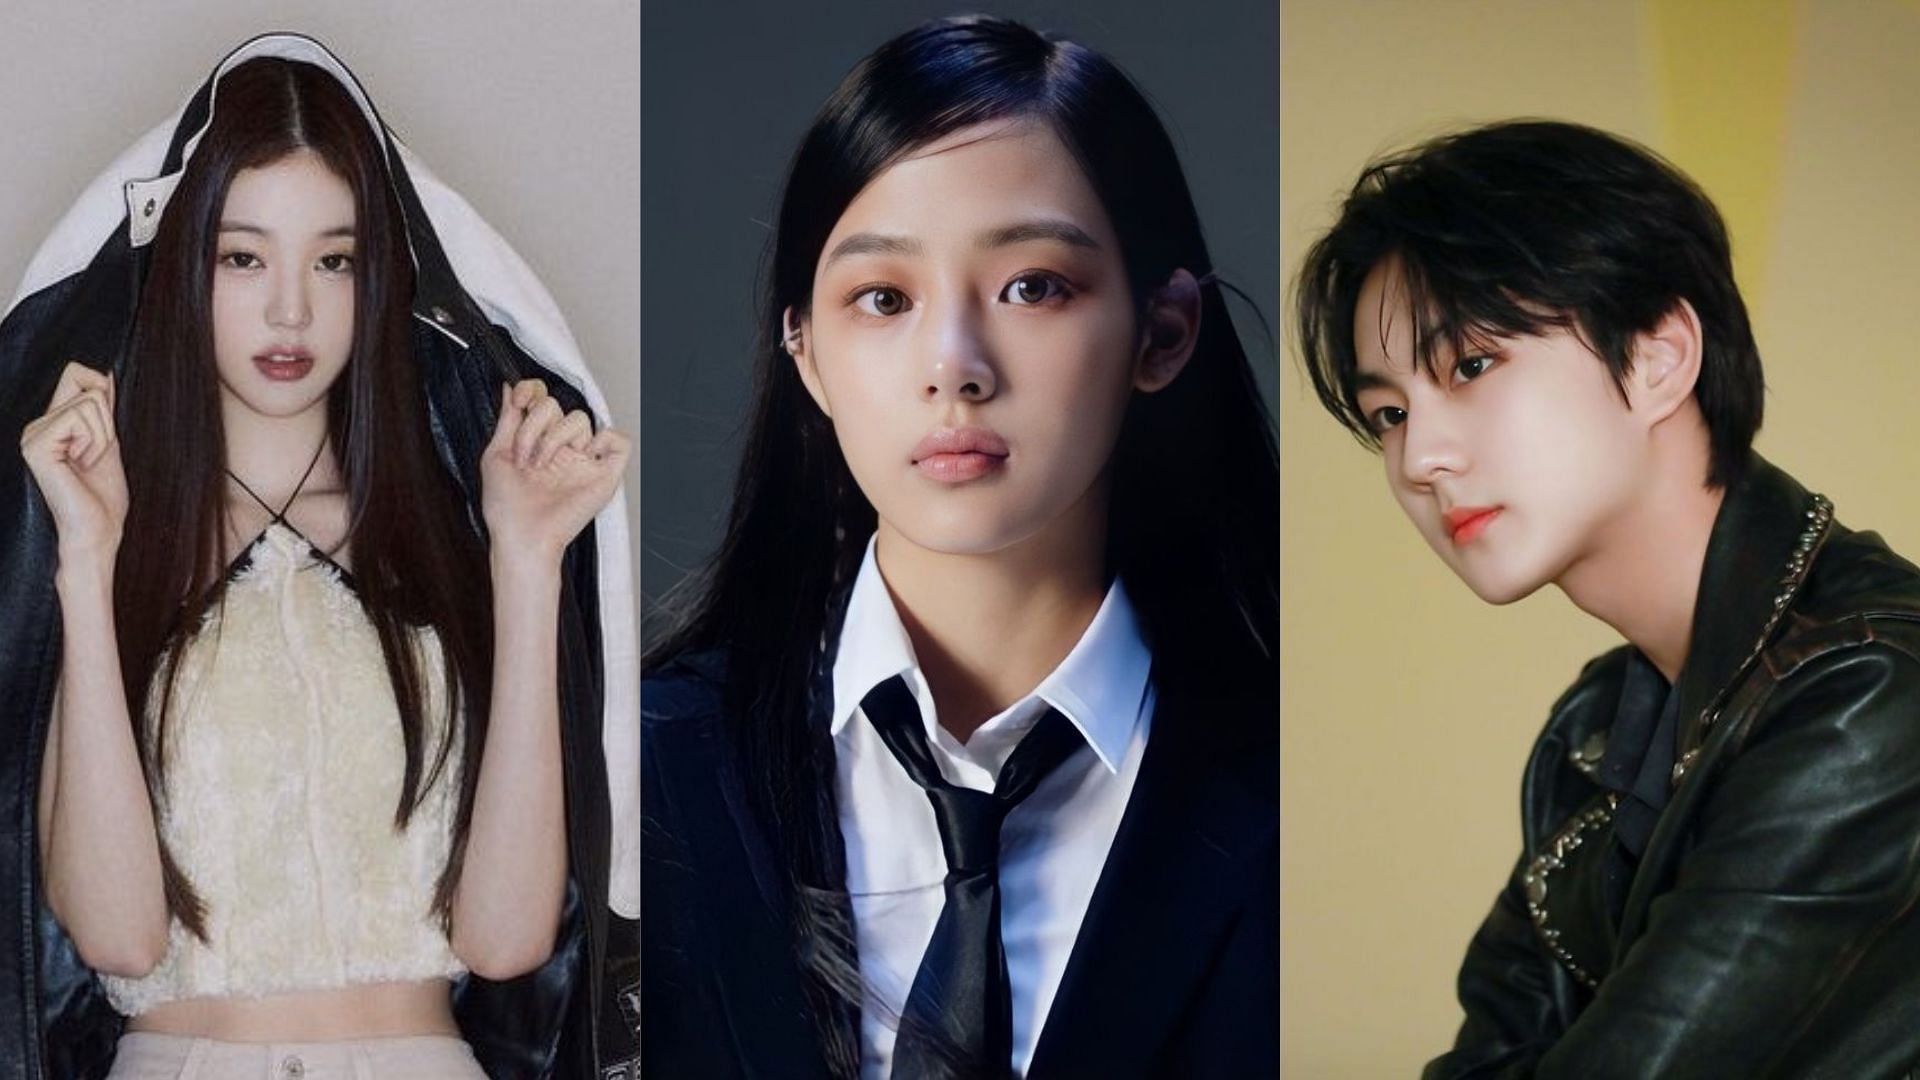 These 2004-born K-pop idols will be skipping the CSAT this year. (Images via @IVEdoll1, @JKMediaUpdate, and @MINJIKIMLOOKS)